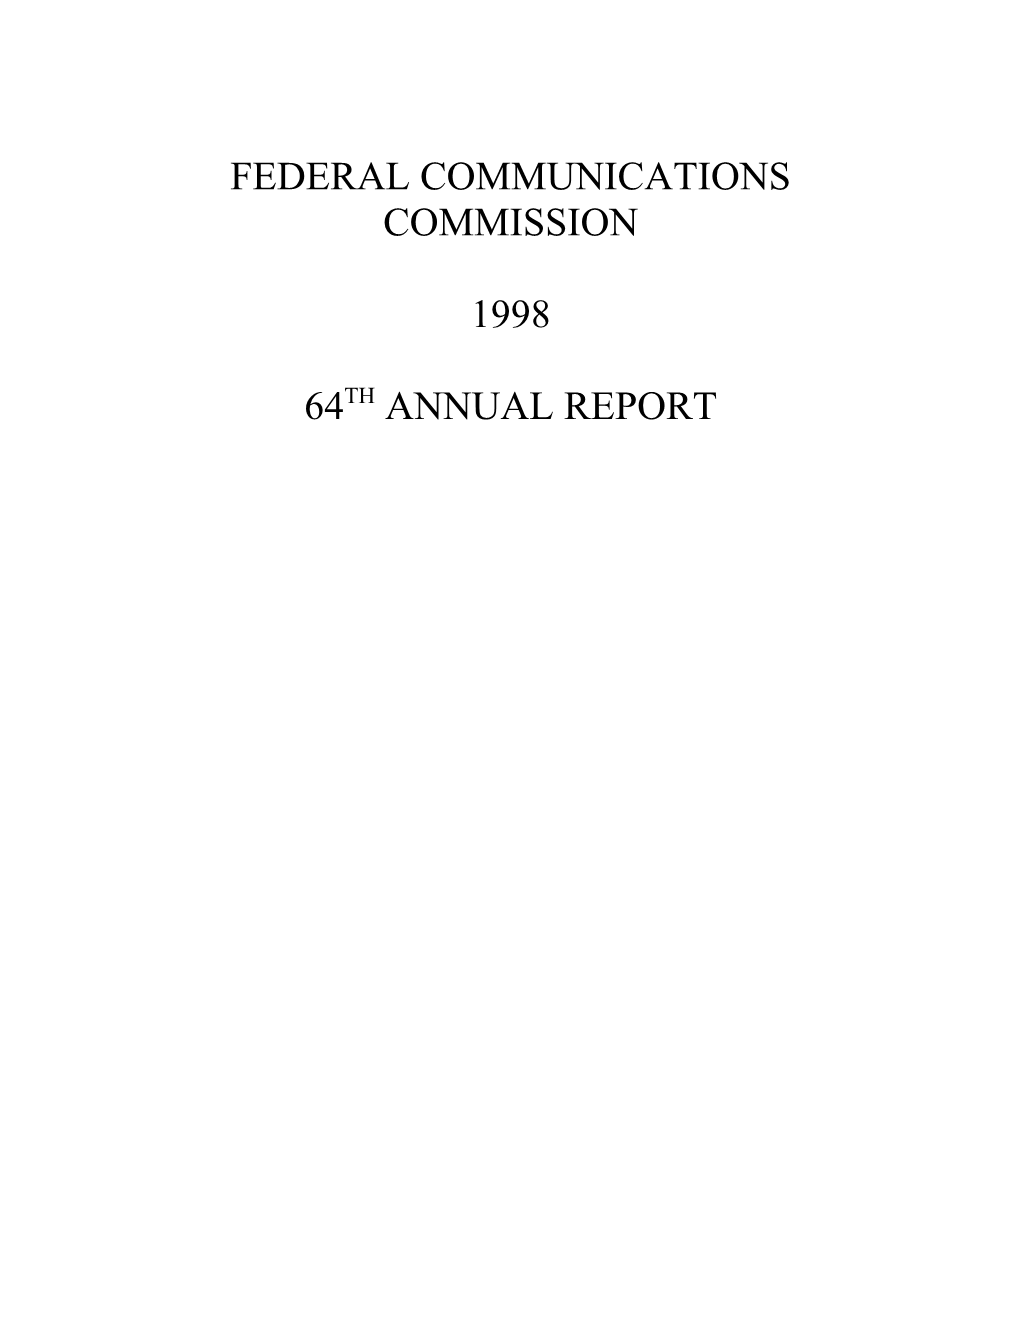 Members of the Federal Communications Commission